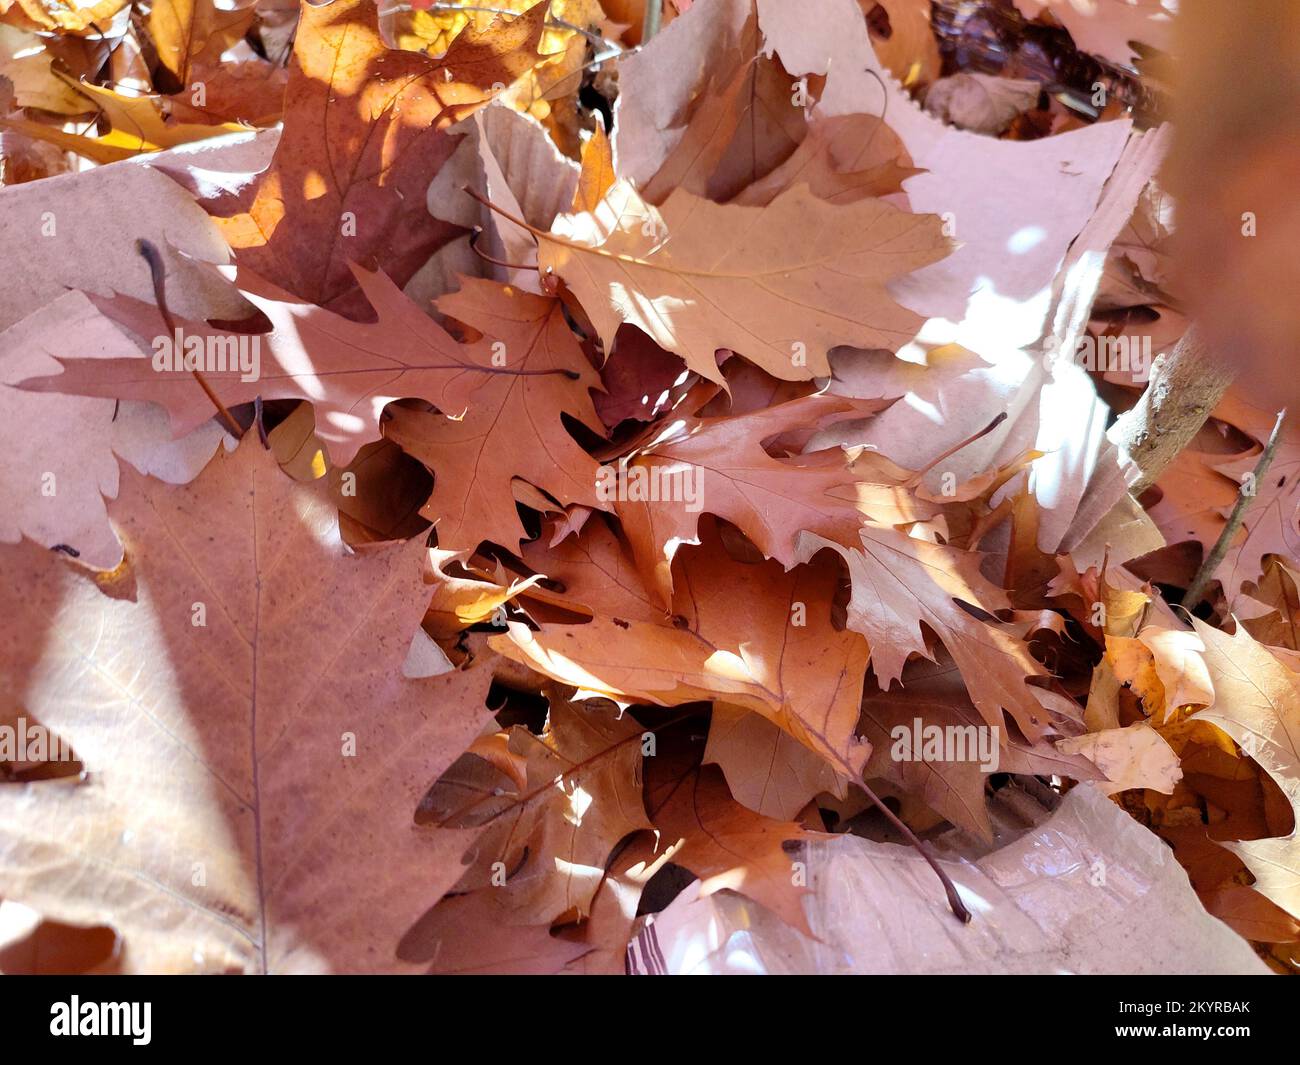 Brown fallen oak leaves with white spots of shining sun close-up. Lot of brown dry oak leaves lies on ground on autumn sunny day. Natural background. Forest woodland nature autumn seasonal backdrop Stock Photo